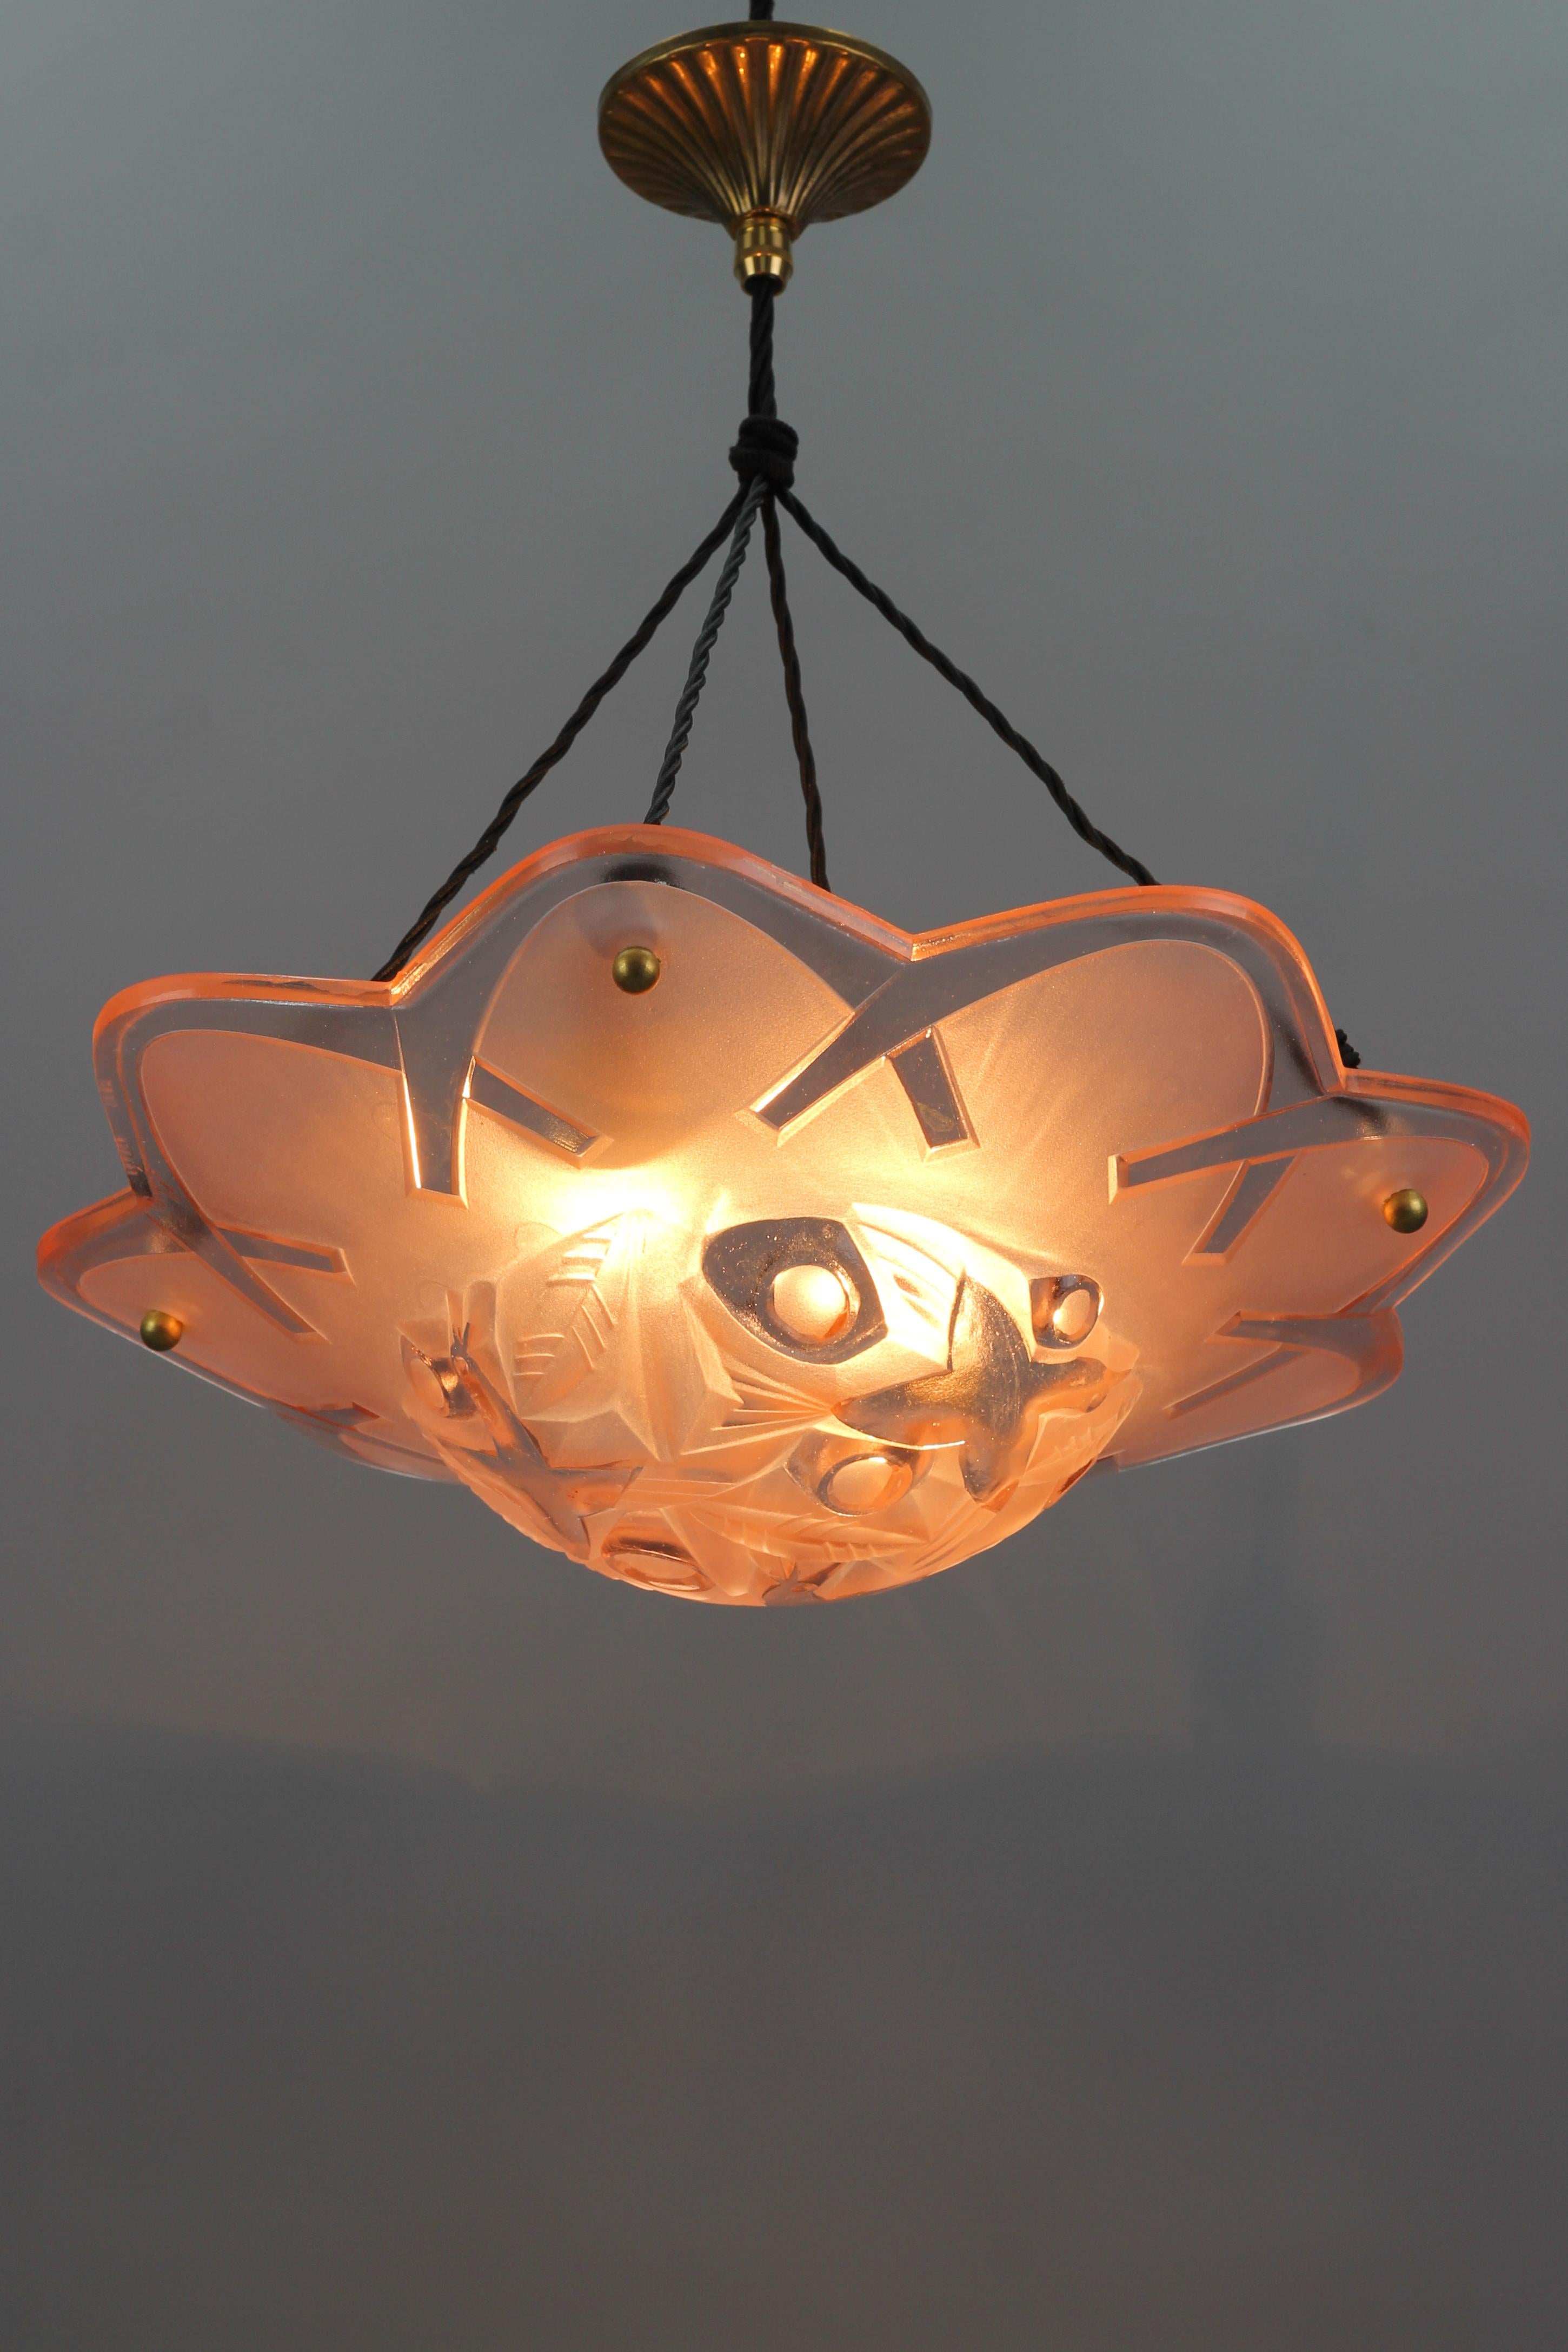 An adorable flower-shaped French Art Deco pendant Ceiling light by David Gueron. This beautiful light fixture features a partially frosted molded glass bowl in pink color with very attractive foliage and three flying birds design in the center of